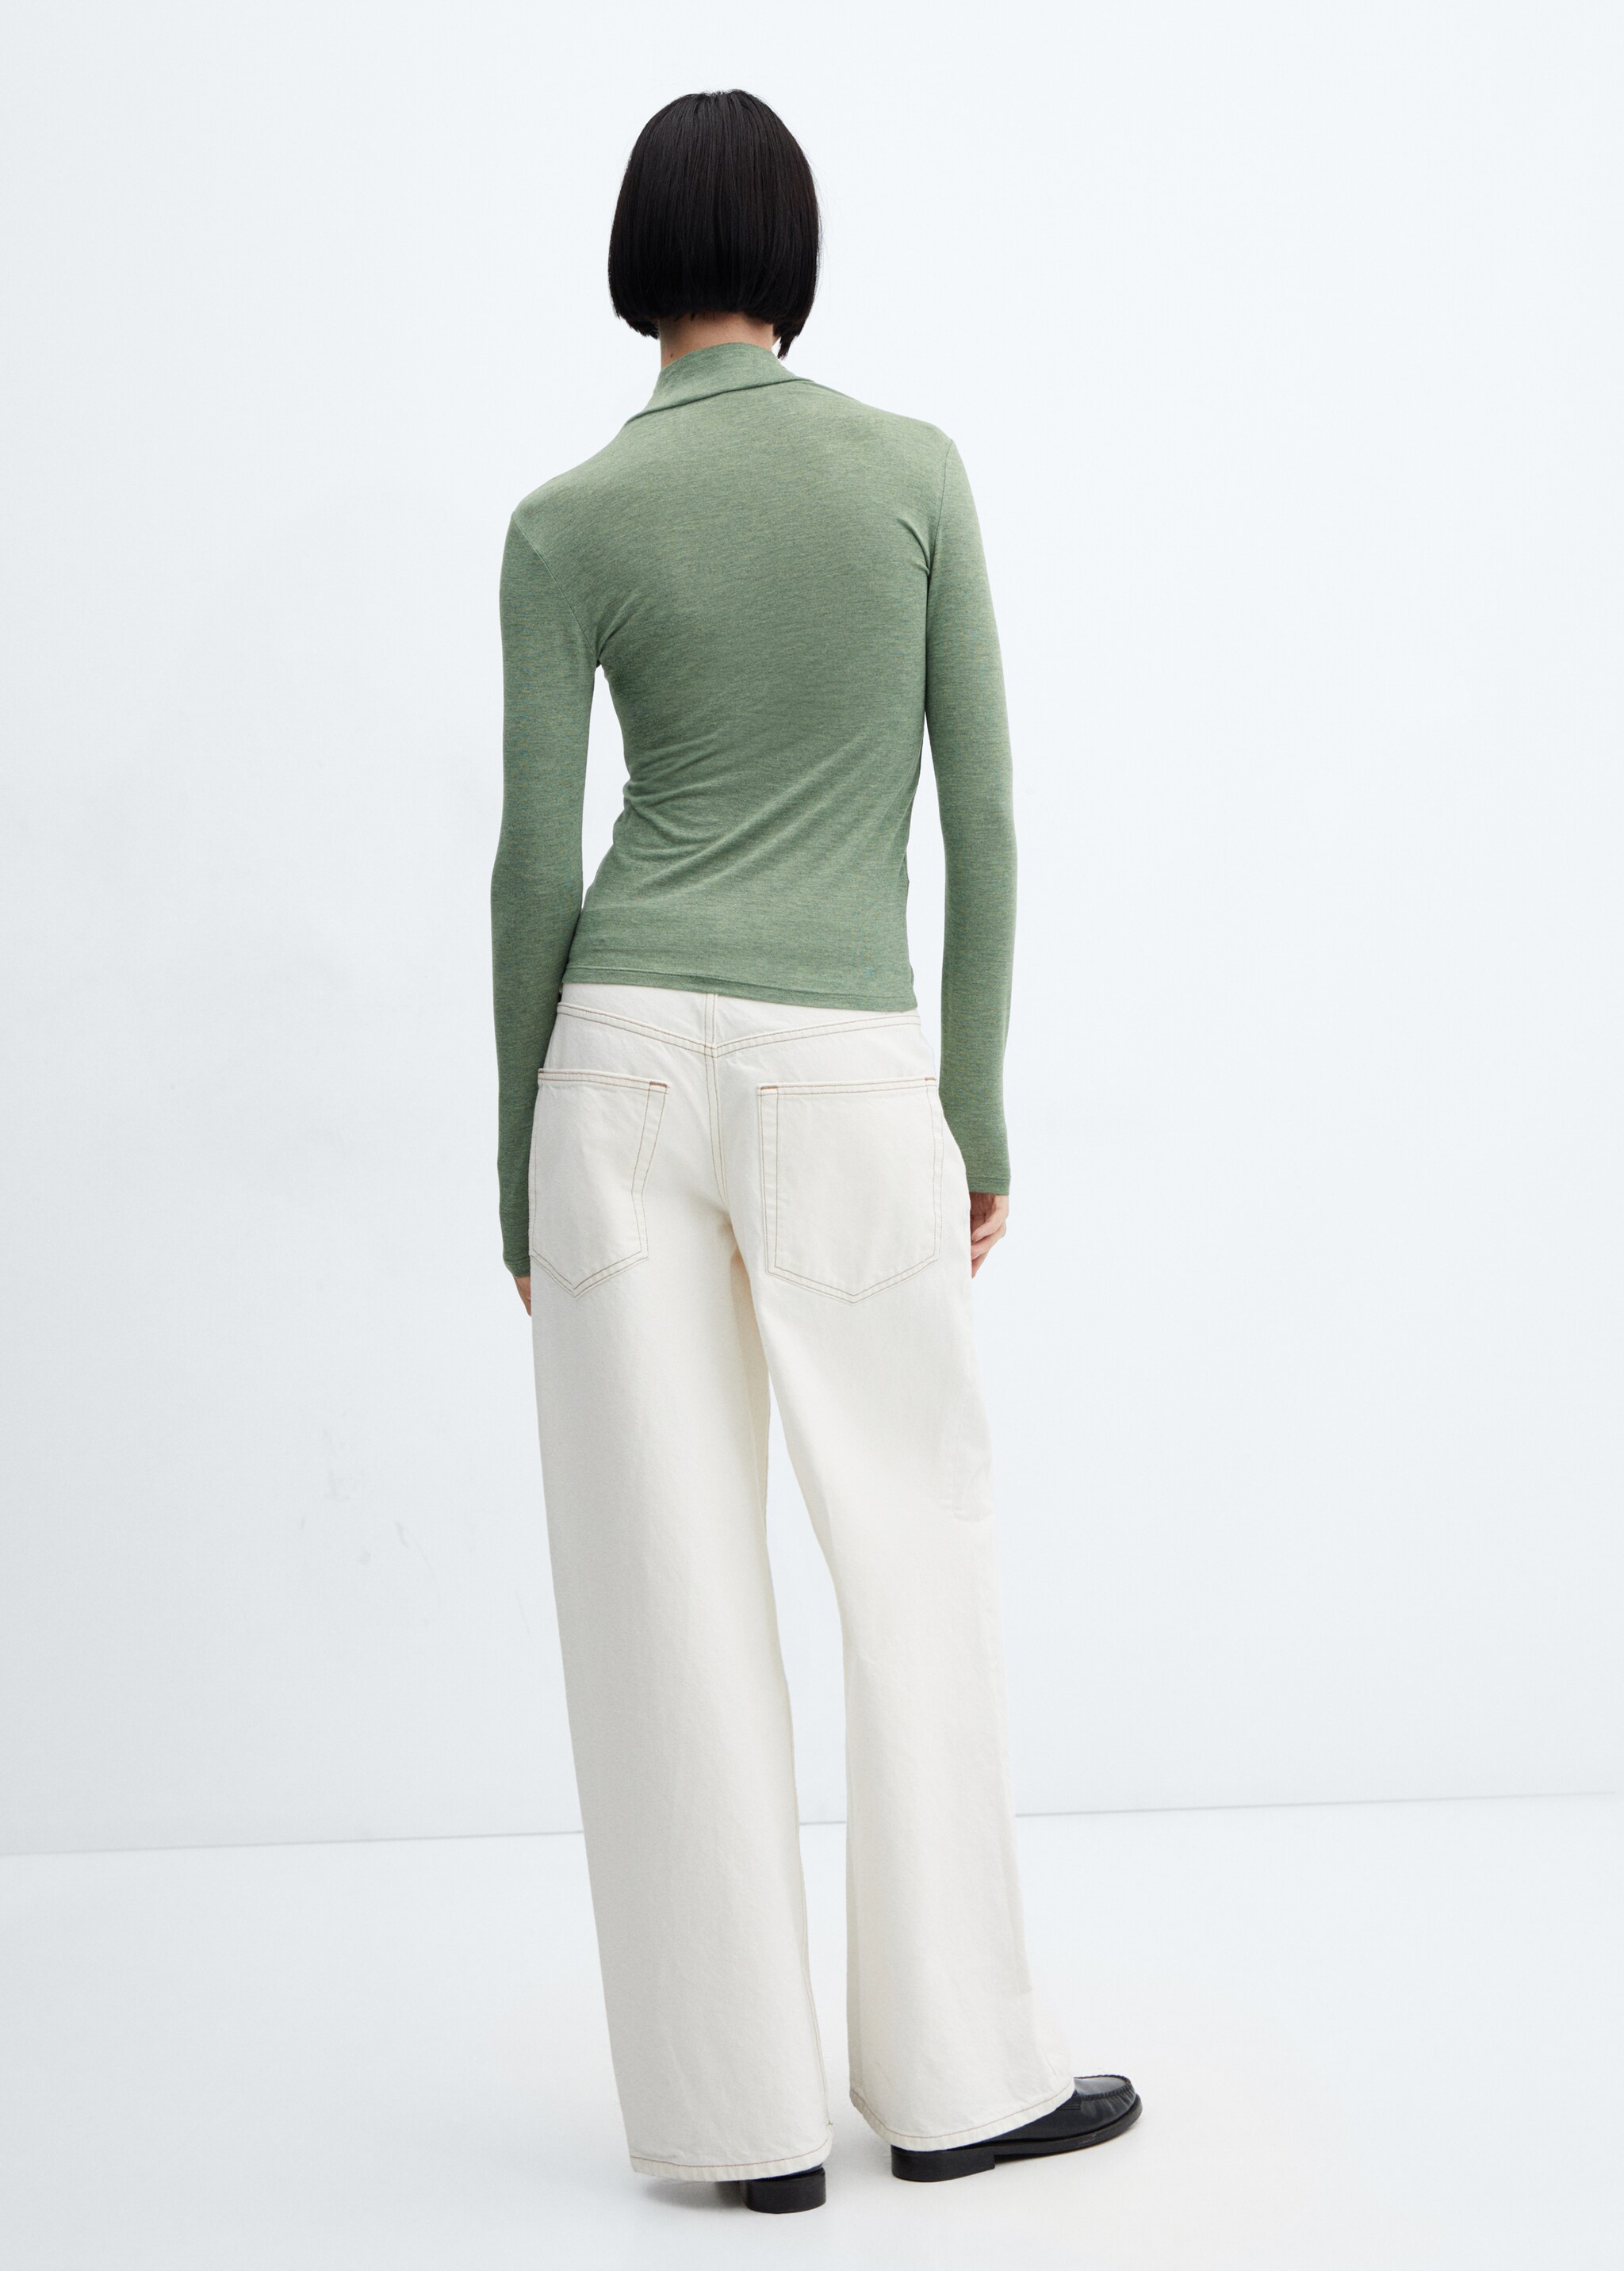 Turtleneck long-sleeved t-shirt - Reverse of the article